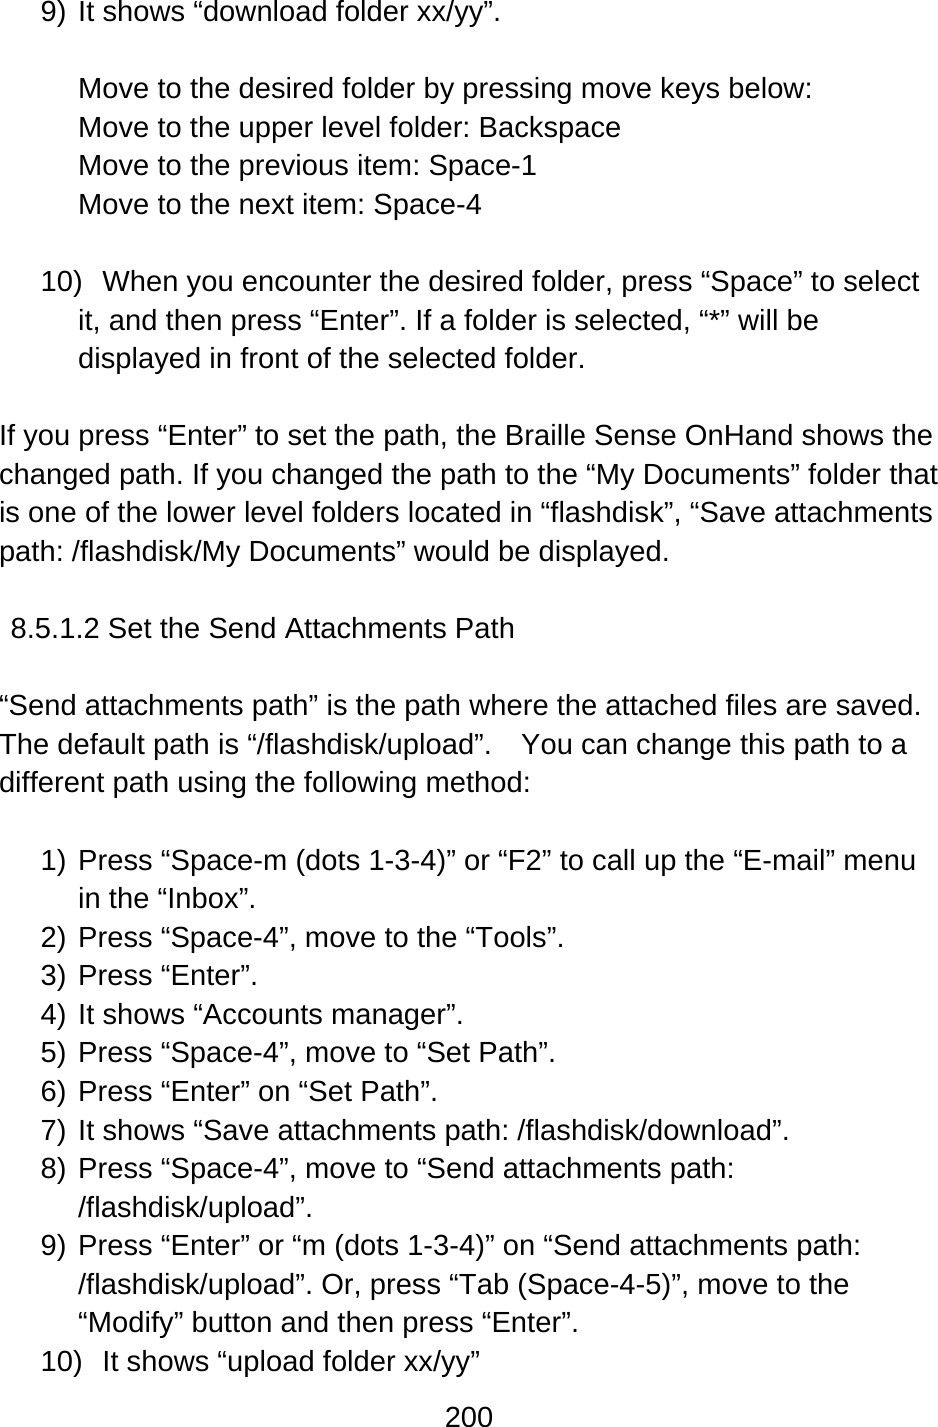 200  9) It shows “download folder xx/yy”.  Move to the desired folder by pressing move keys below: Move to the upper level folder: Backspace Move to the previous item: Space-1 Move to the next item: Space-4  10)  When you encounter the desired folder, press “Space” to select it, and then press “Enter”. If a folder is selected, “*” will be displayed in front of the selected folder.  If you press “Enter” to set the path, the Braille Sense OnHand shows the changed path. If you changed the path to the “My Documents” folder that is one of the lower level folders located in “flashdisk”, “Save attachments path: /flashdisk/My Documents” would be displayed.  8.5.1.2 Set the Send Attachments Path  “Send attachments path” is the path where the attached files are saved.   The default path is “/flashdisk/upload”.    You can change this path to a different path using the following method:  1) Press “Space-m (dots 1-3-4)” or “F2” to call up the “E-mail” menu in the “Inbox”. 2) Press “Space-4”, move to the “Tools”. 3) Press “Enter”.  4) It shows “Accounts manager”. 5) Press “Space-4”, move to “Set Path”. 6) Press “Enter” on “Set Path”.     7) It shows “Save attachments path: /flashdisk/download”. 8) Press “Space-4”, move to “Send attachments path: /flashdisk/upload”. 9) Press “Enter” or “m (dots 1-3-4)” on “Send attachments path: /flashdisk/upload”. Or, press “Tab (Space-4-5)”, move to the “Modify” button and then press “Enter”. 10)  It shows “upload folder xx/yy”   